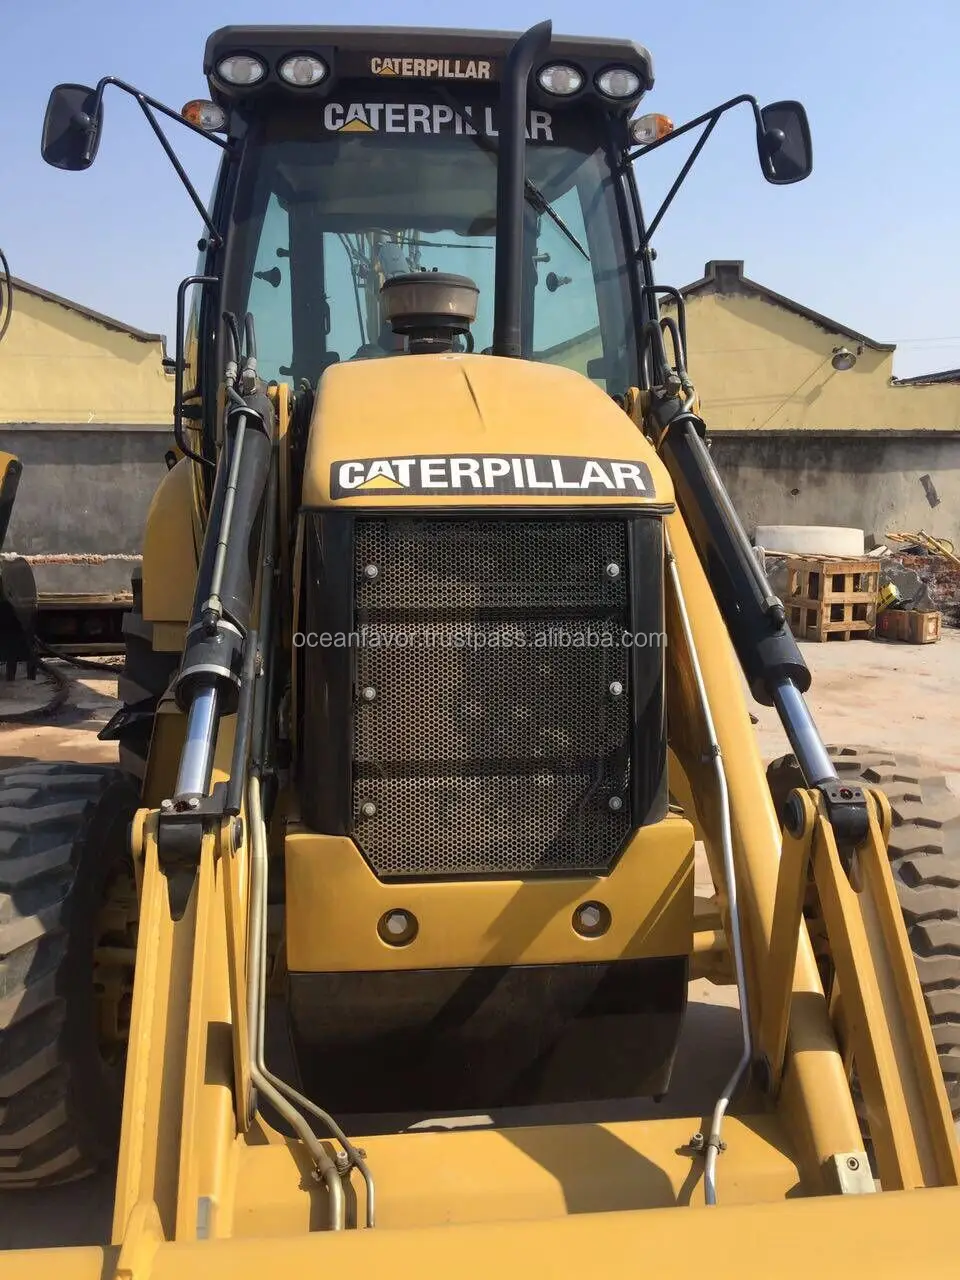 New Caterpillar 420f Ii Backhoe Loader For Sale In China,New Original